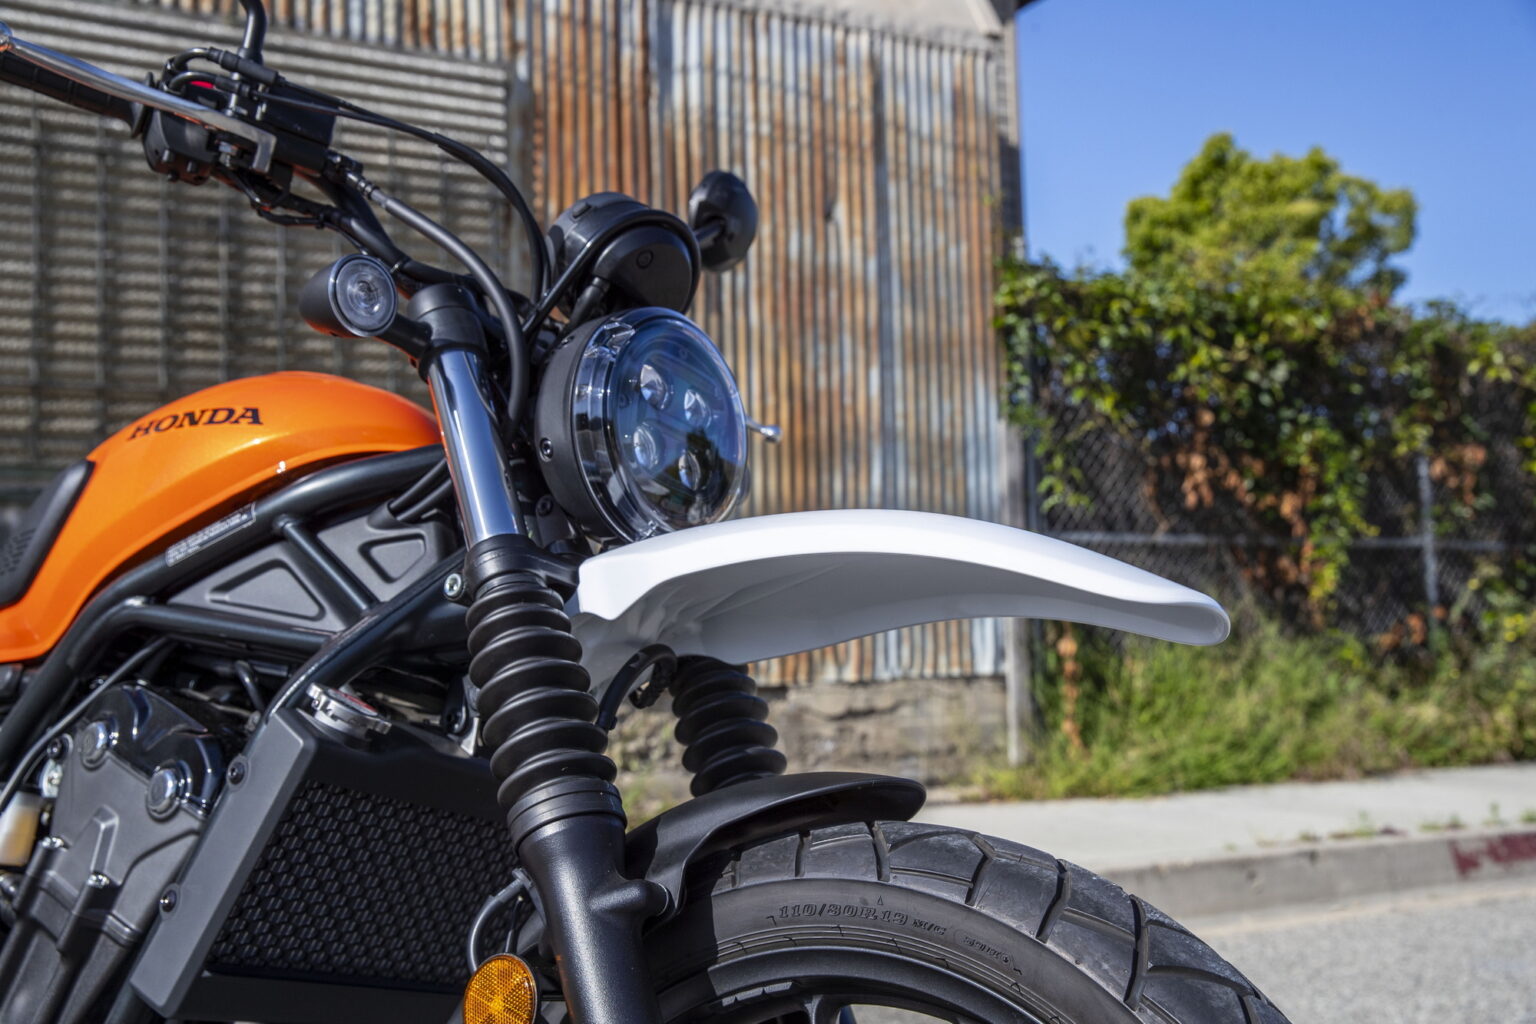 Honda Updates American Motorcycle Offerings With Retro SCL500 Scrambler ...